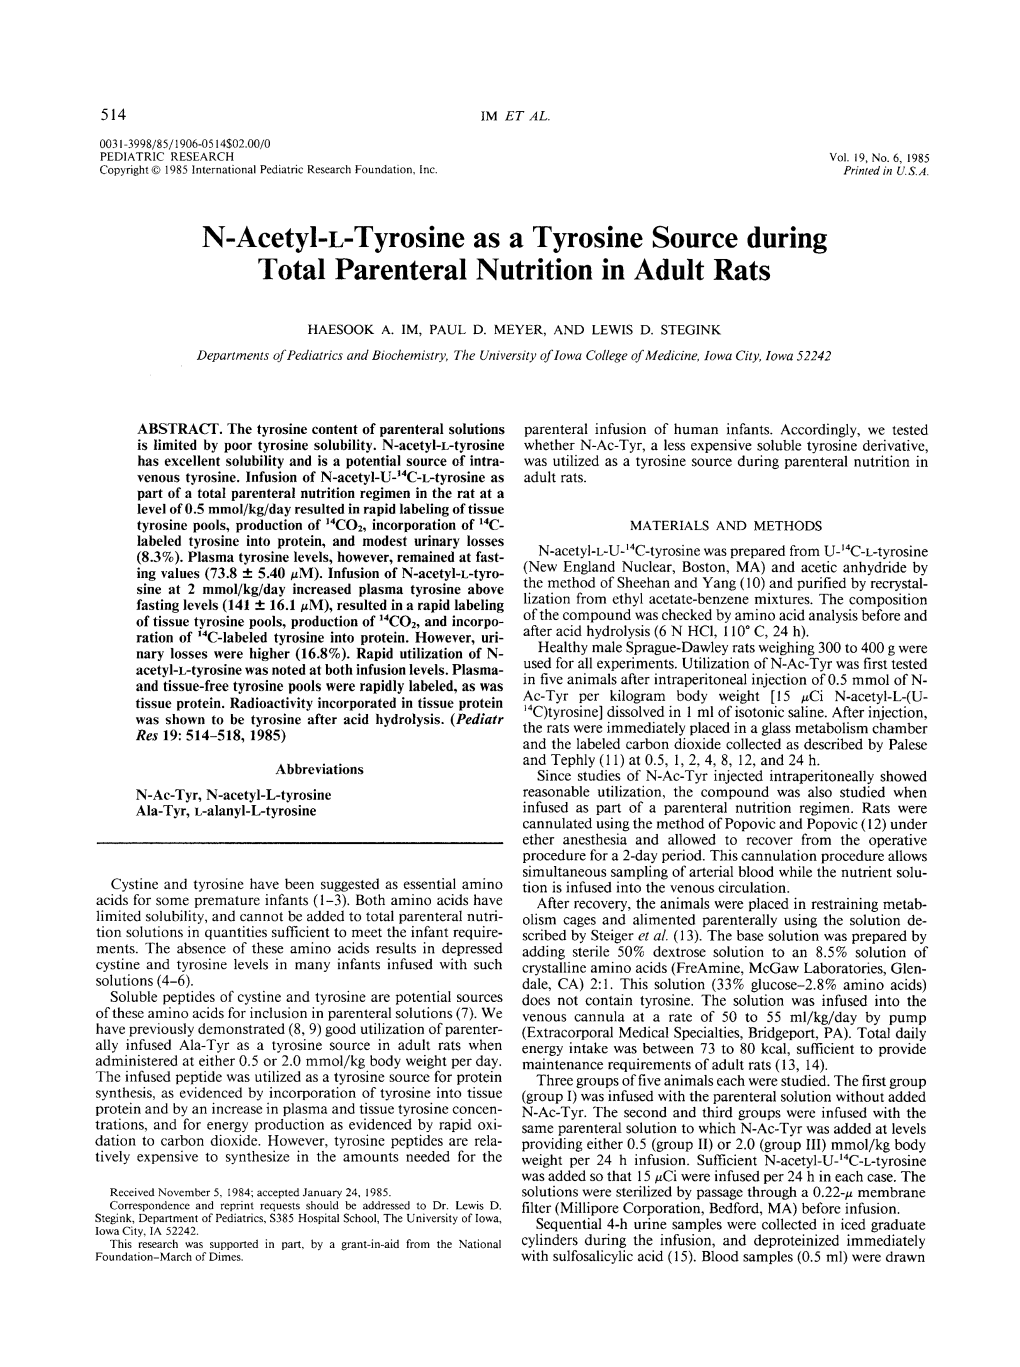 N-Acetyl-L-Tyrosine As a Tyrosine Source During Total Parenteral Nutrition in Adult Rats